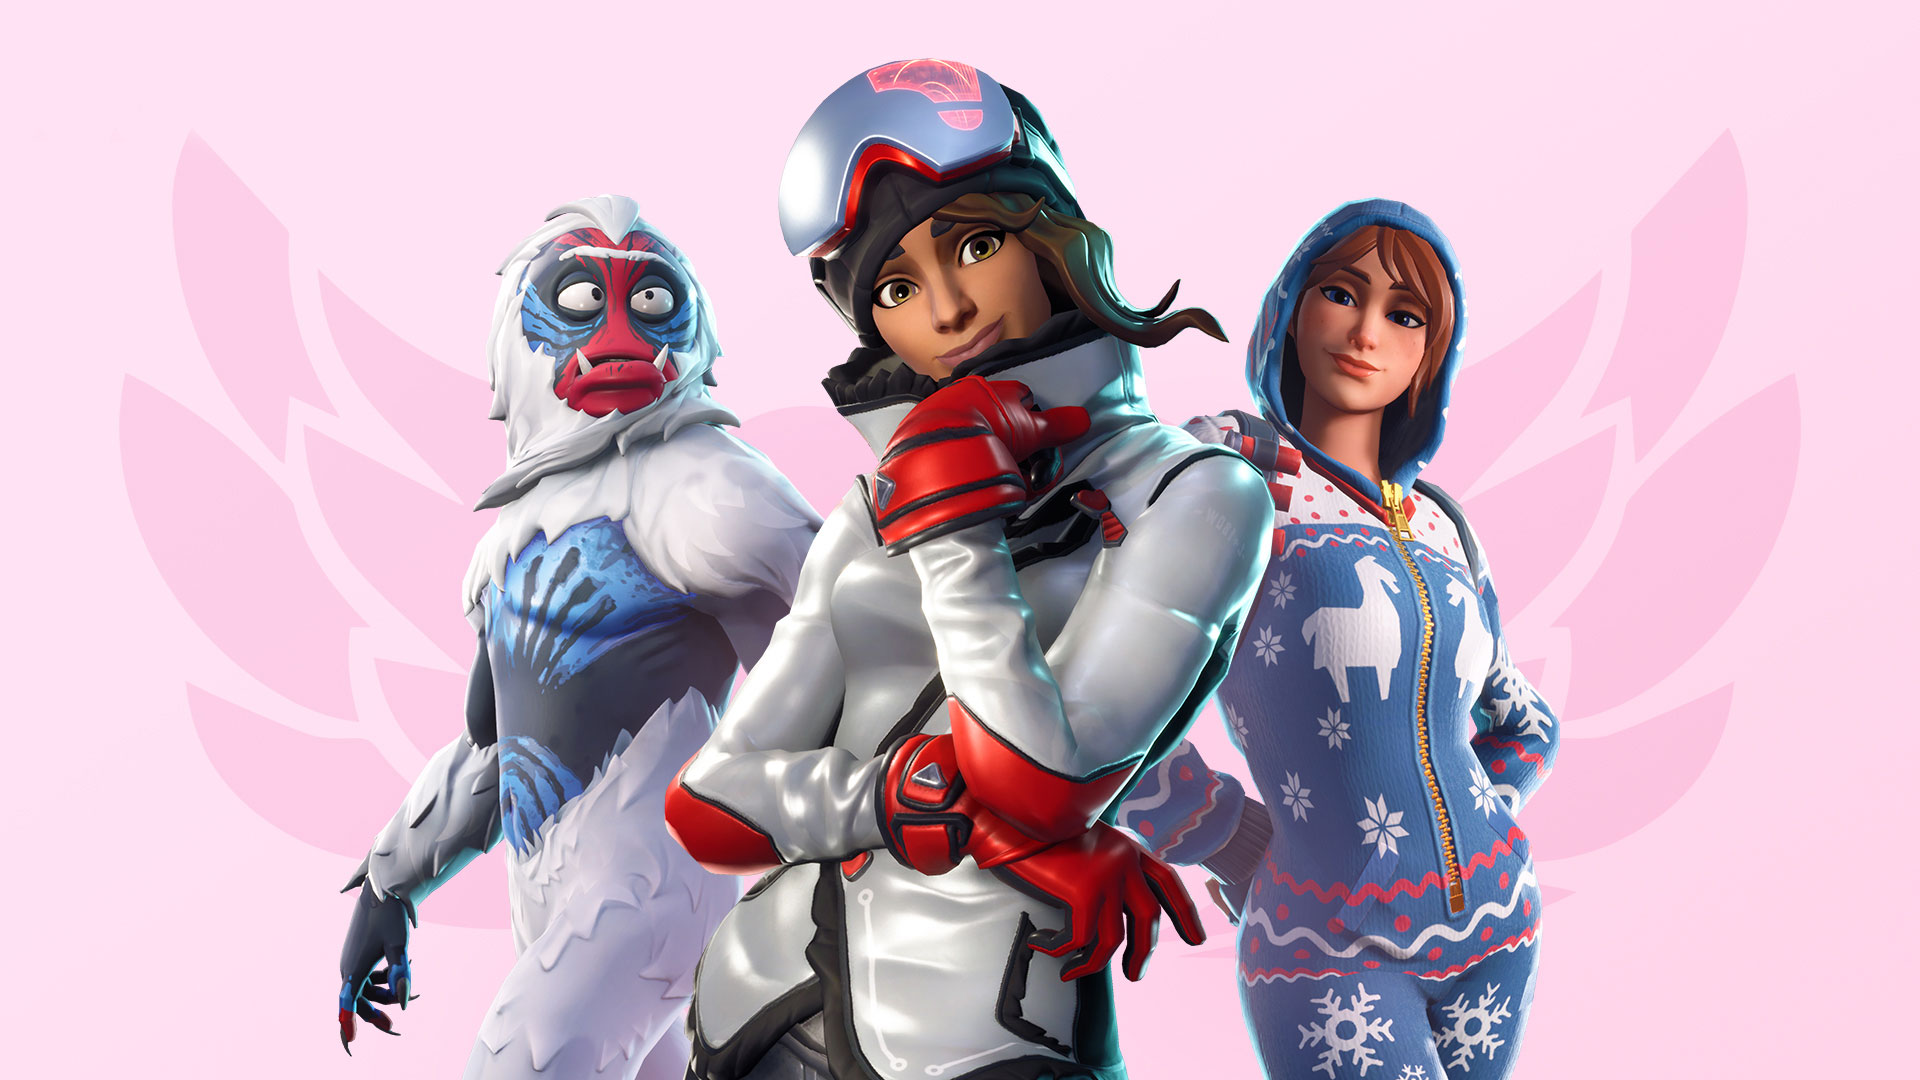 fortnite overtime challenges guide how to complete the extra challenges for a free battle pass gamesradar - fortnite free february